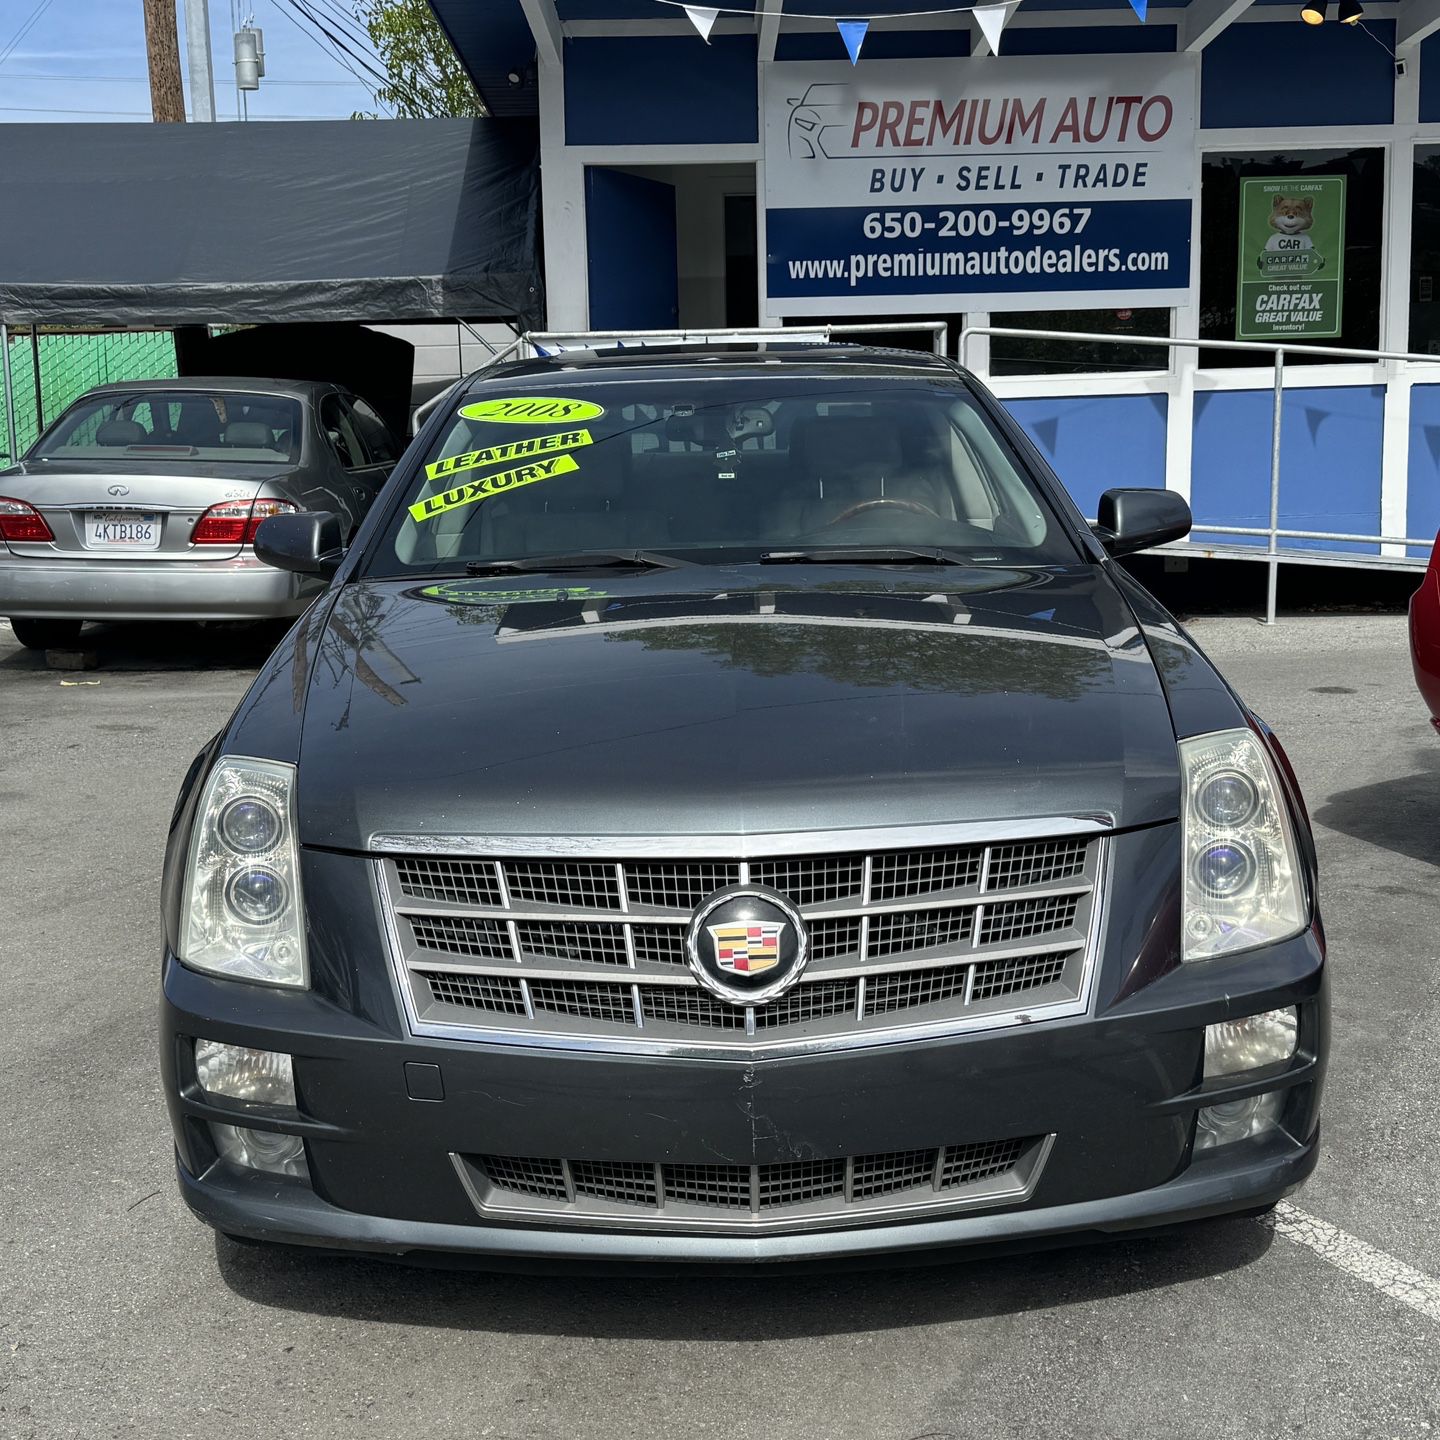 2008 Cadillac STS. Clean Title, Pass Smog, Leather! Runs Great!